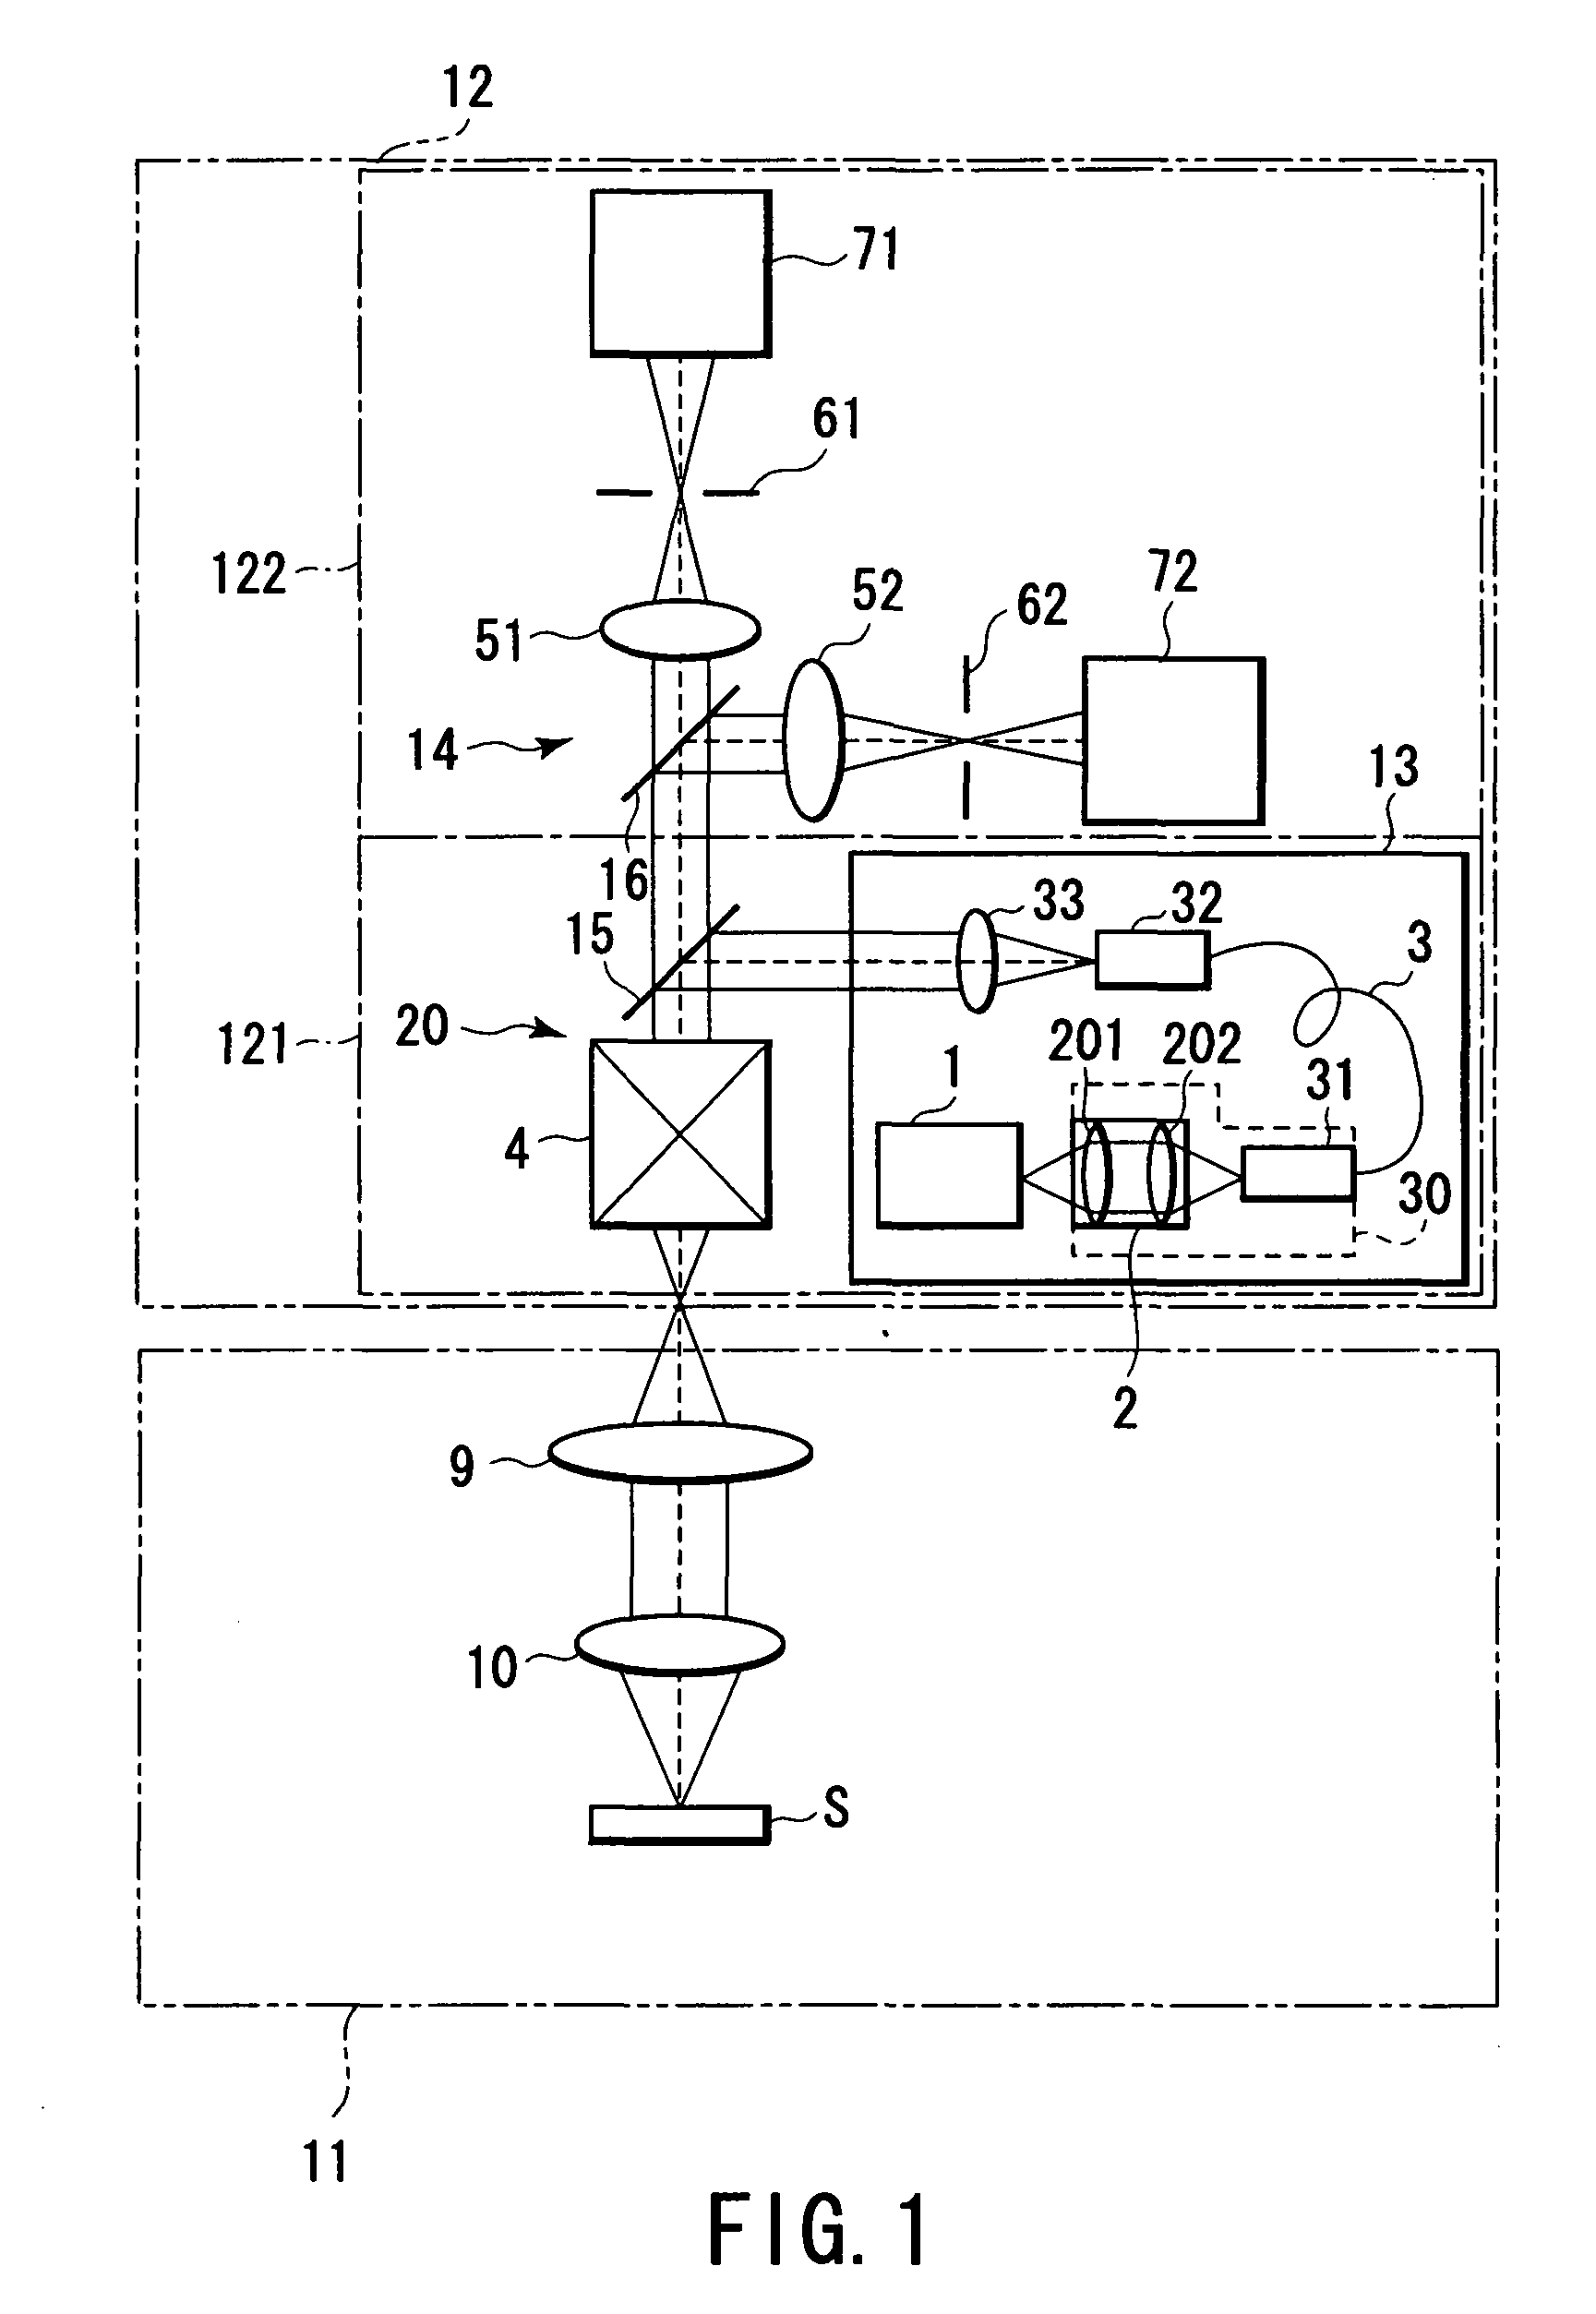 Laser scanning microscope, semiconductor laser light source unit, scanning unit for a laser scanning microscope, and method of connecting semiconductor light source to scanning microscope